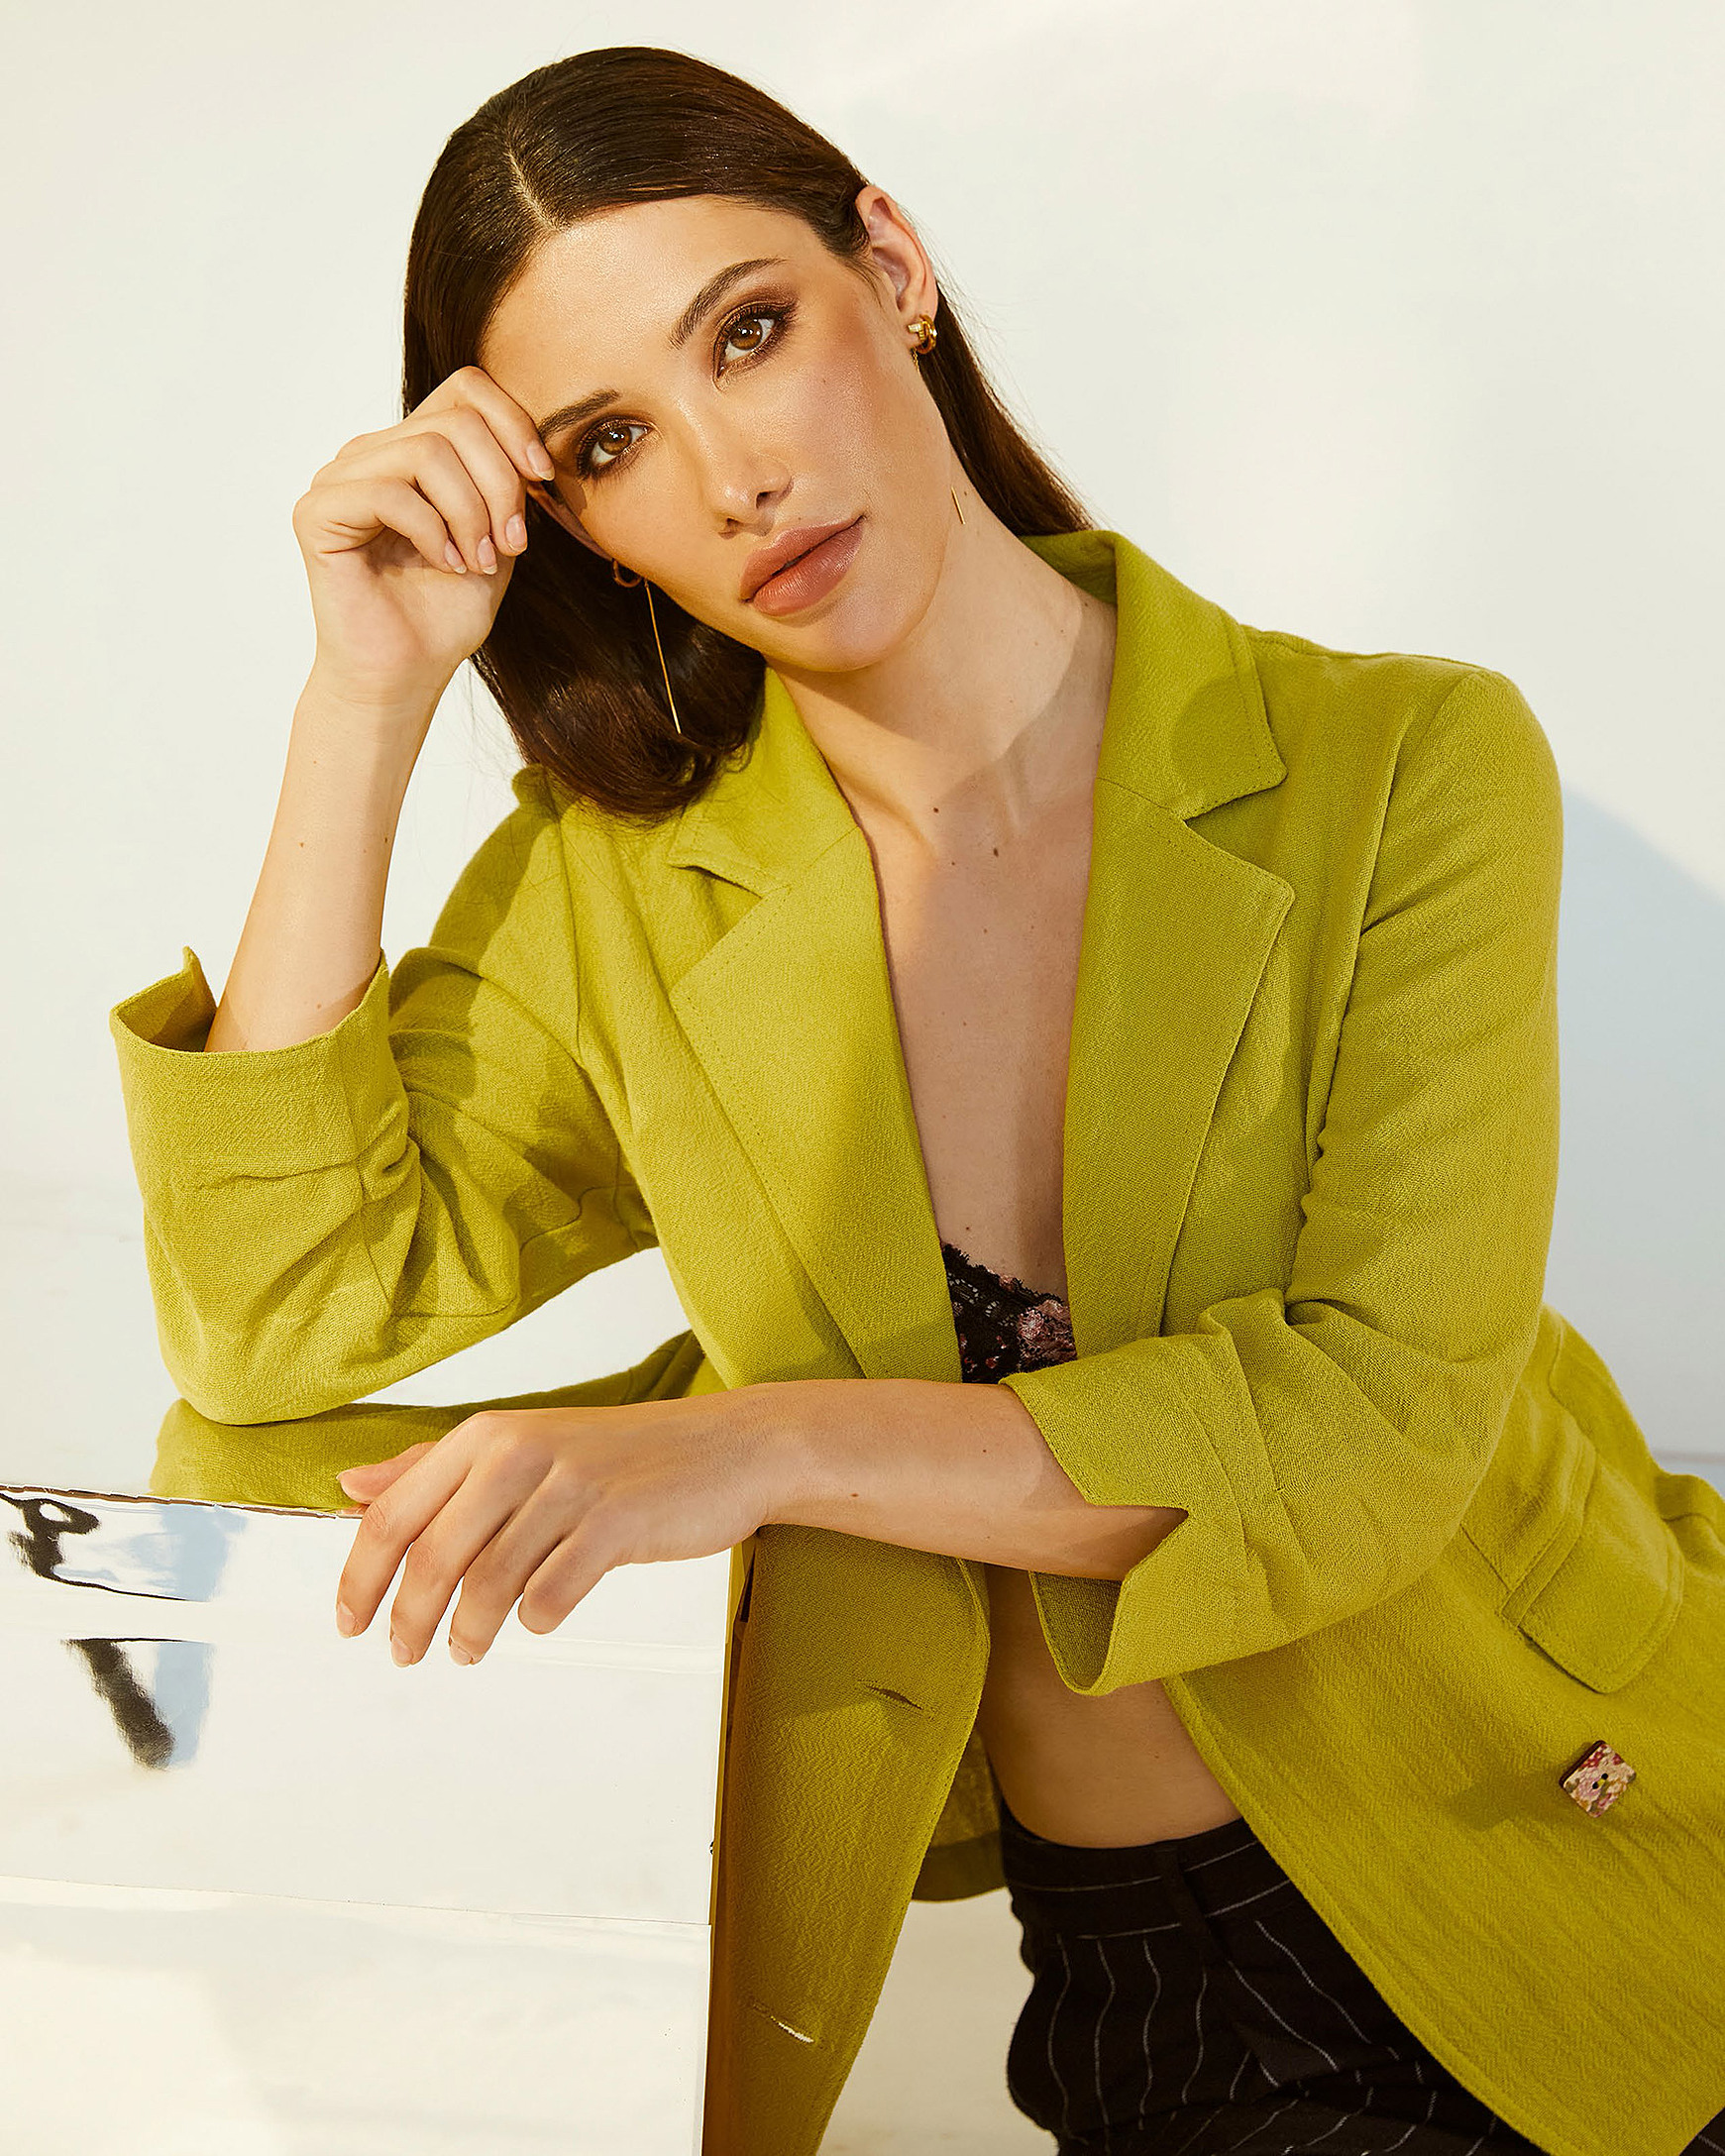 A female model sits on the ground and lean against a mirror cube in a light kiwi green jacket